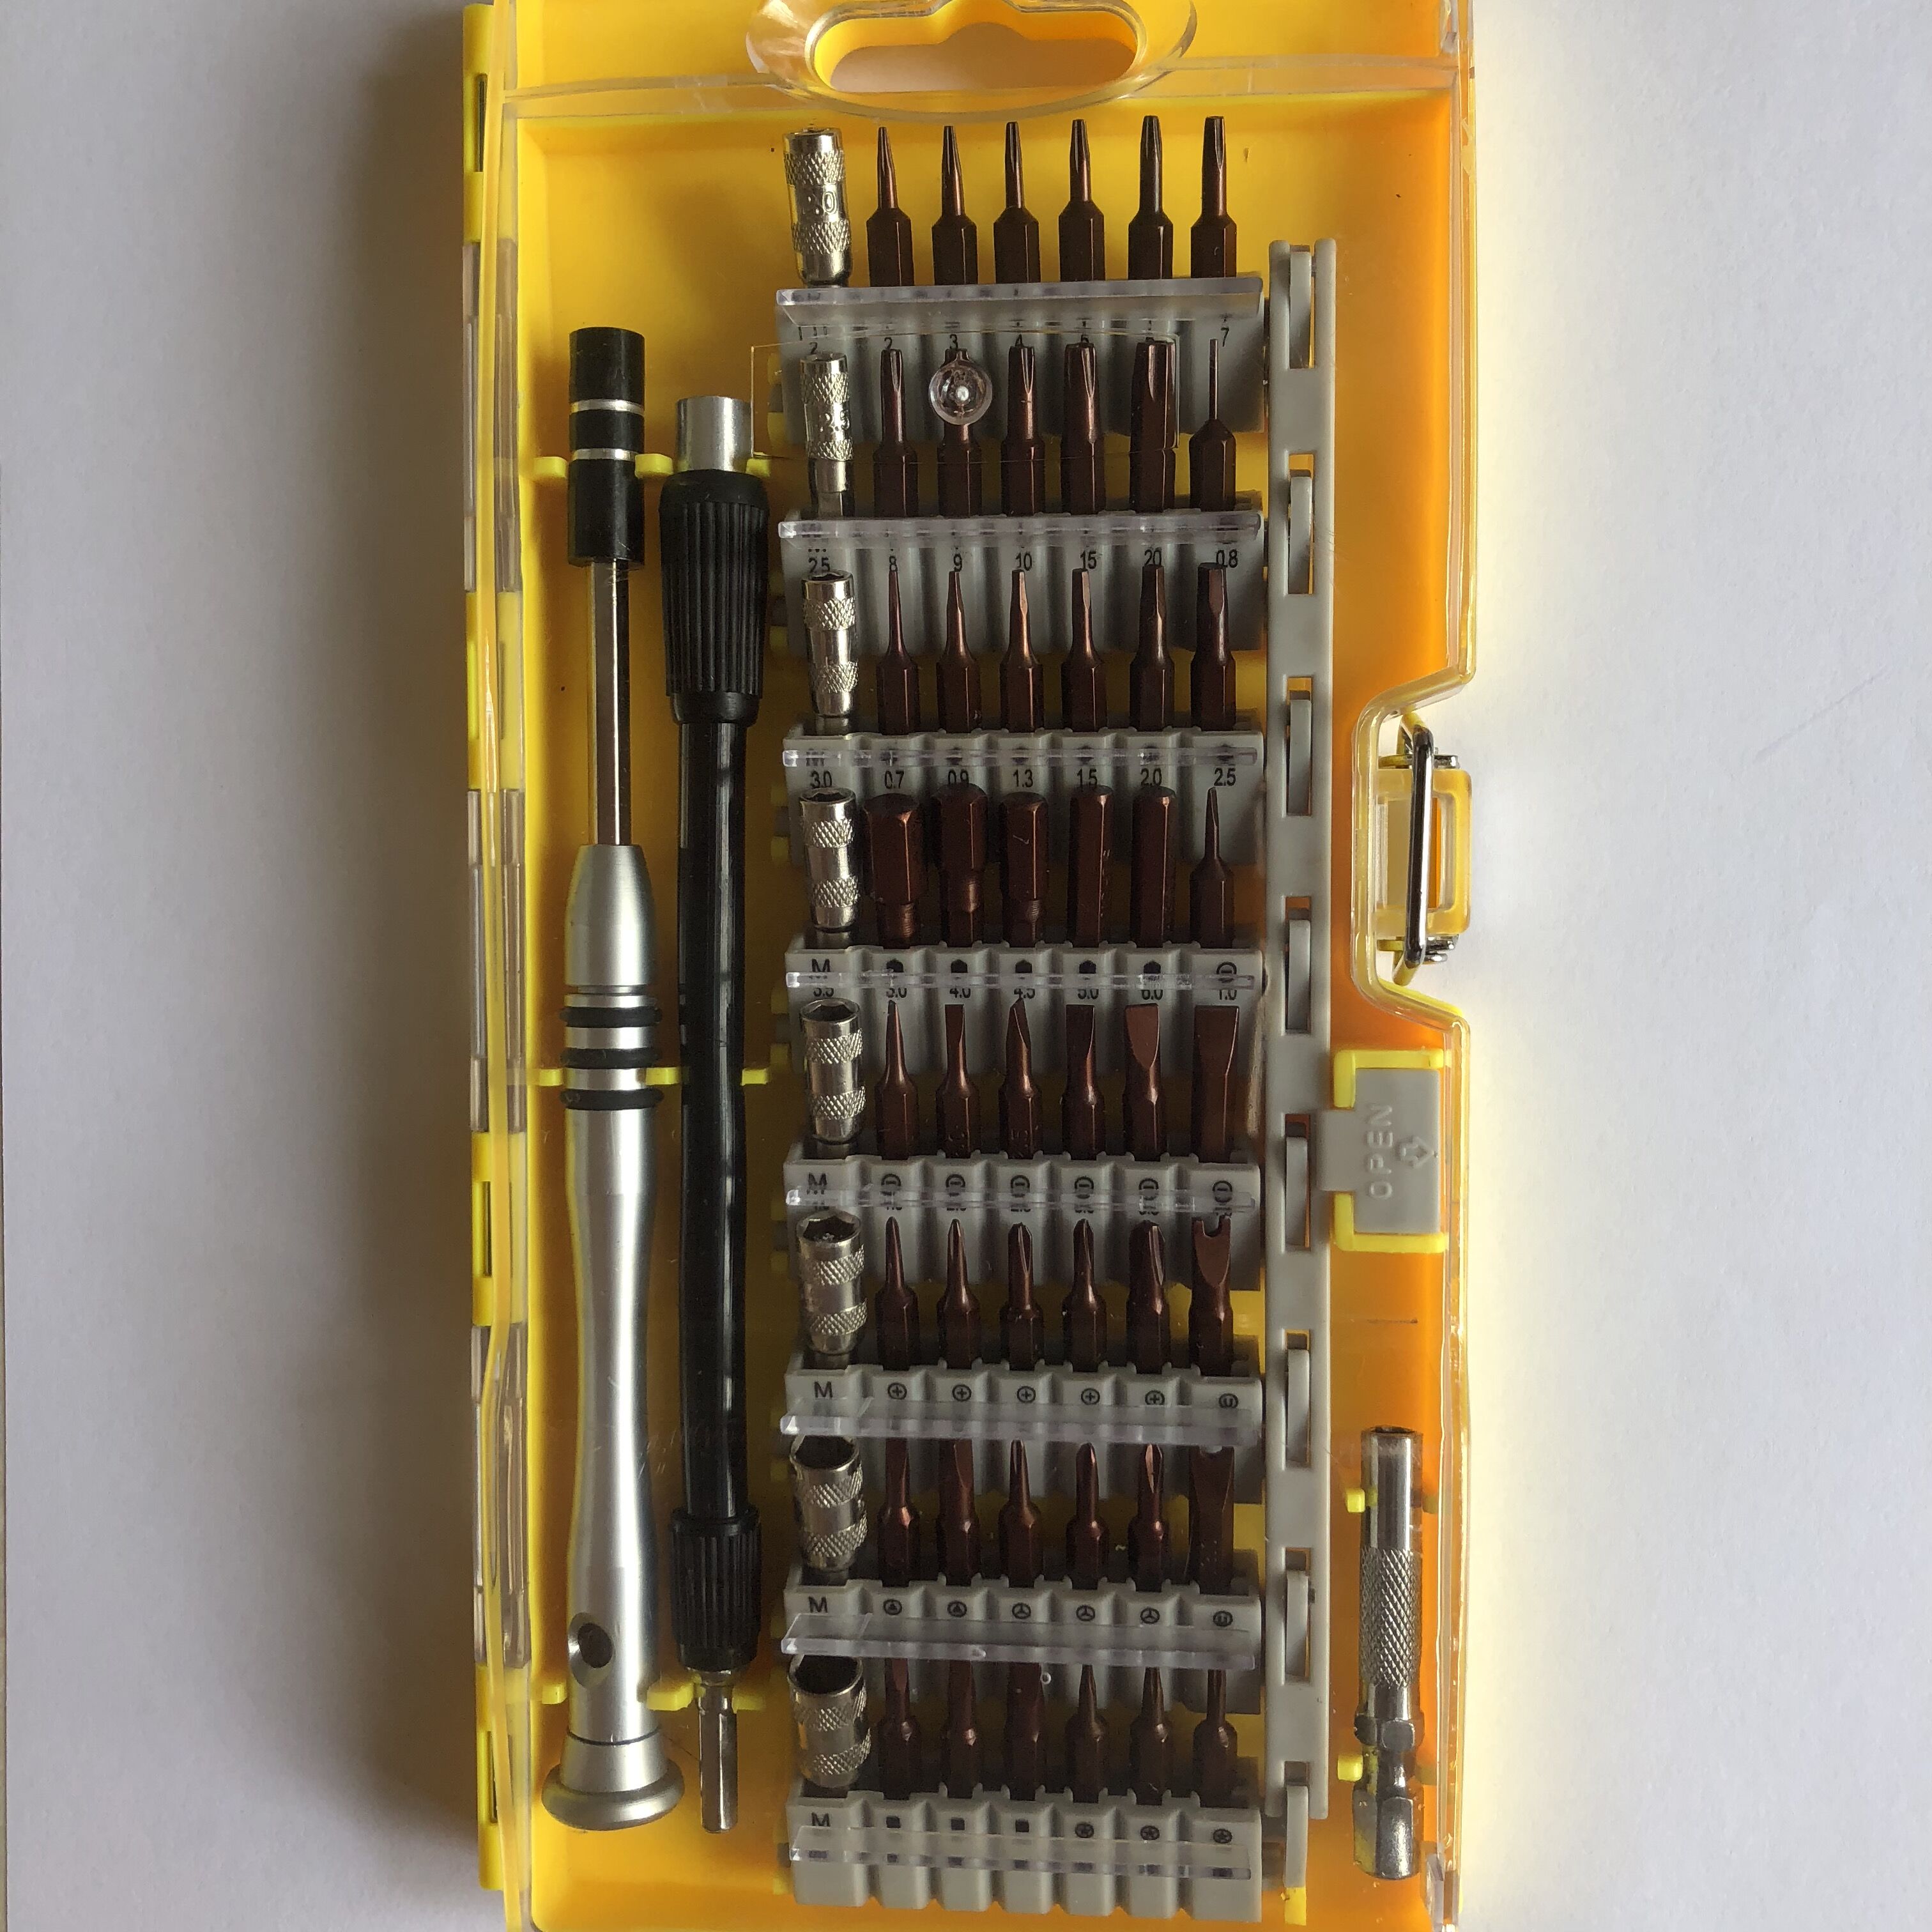 ELECALL 61-in-1 Screwdriver Bit Magnetic Driver Kit 